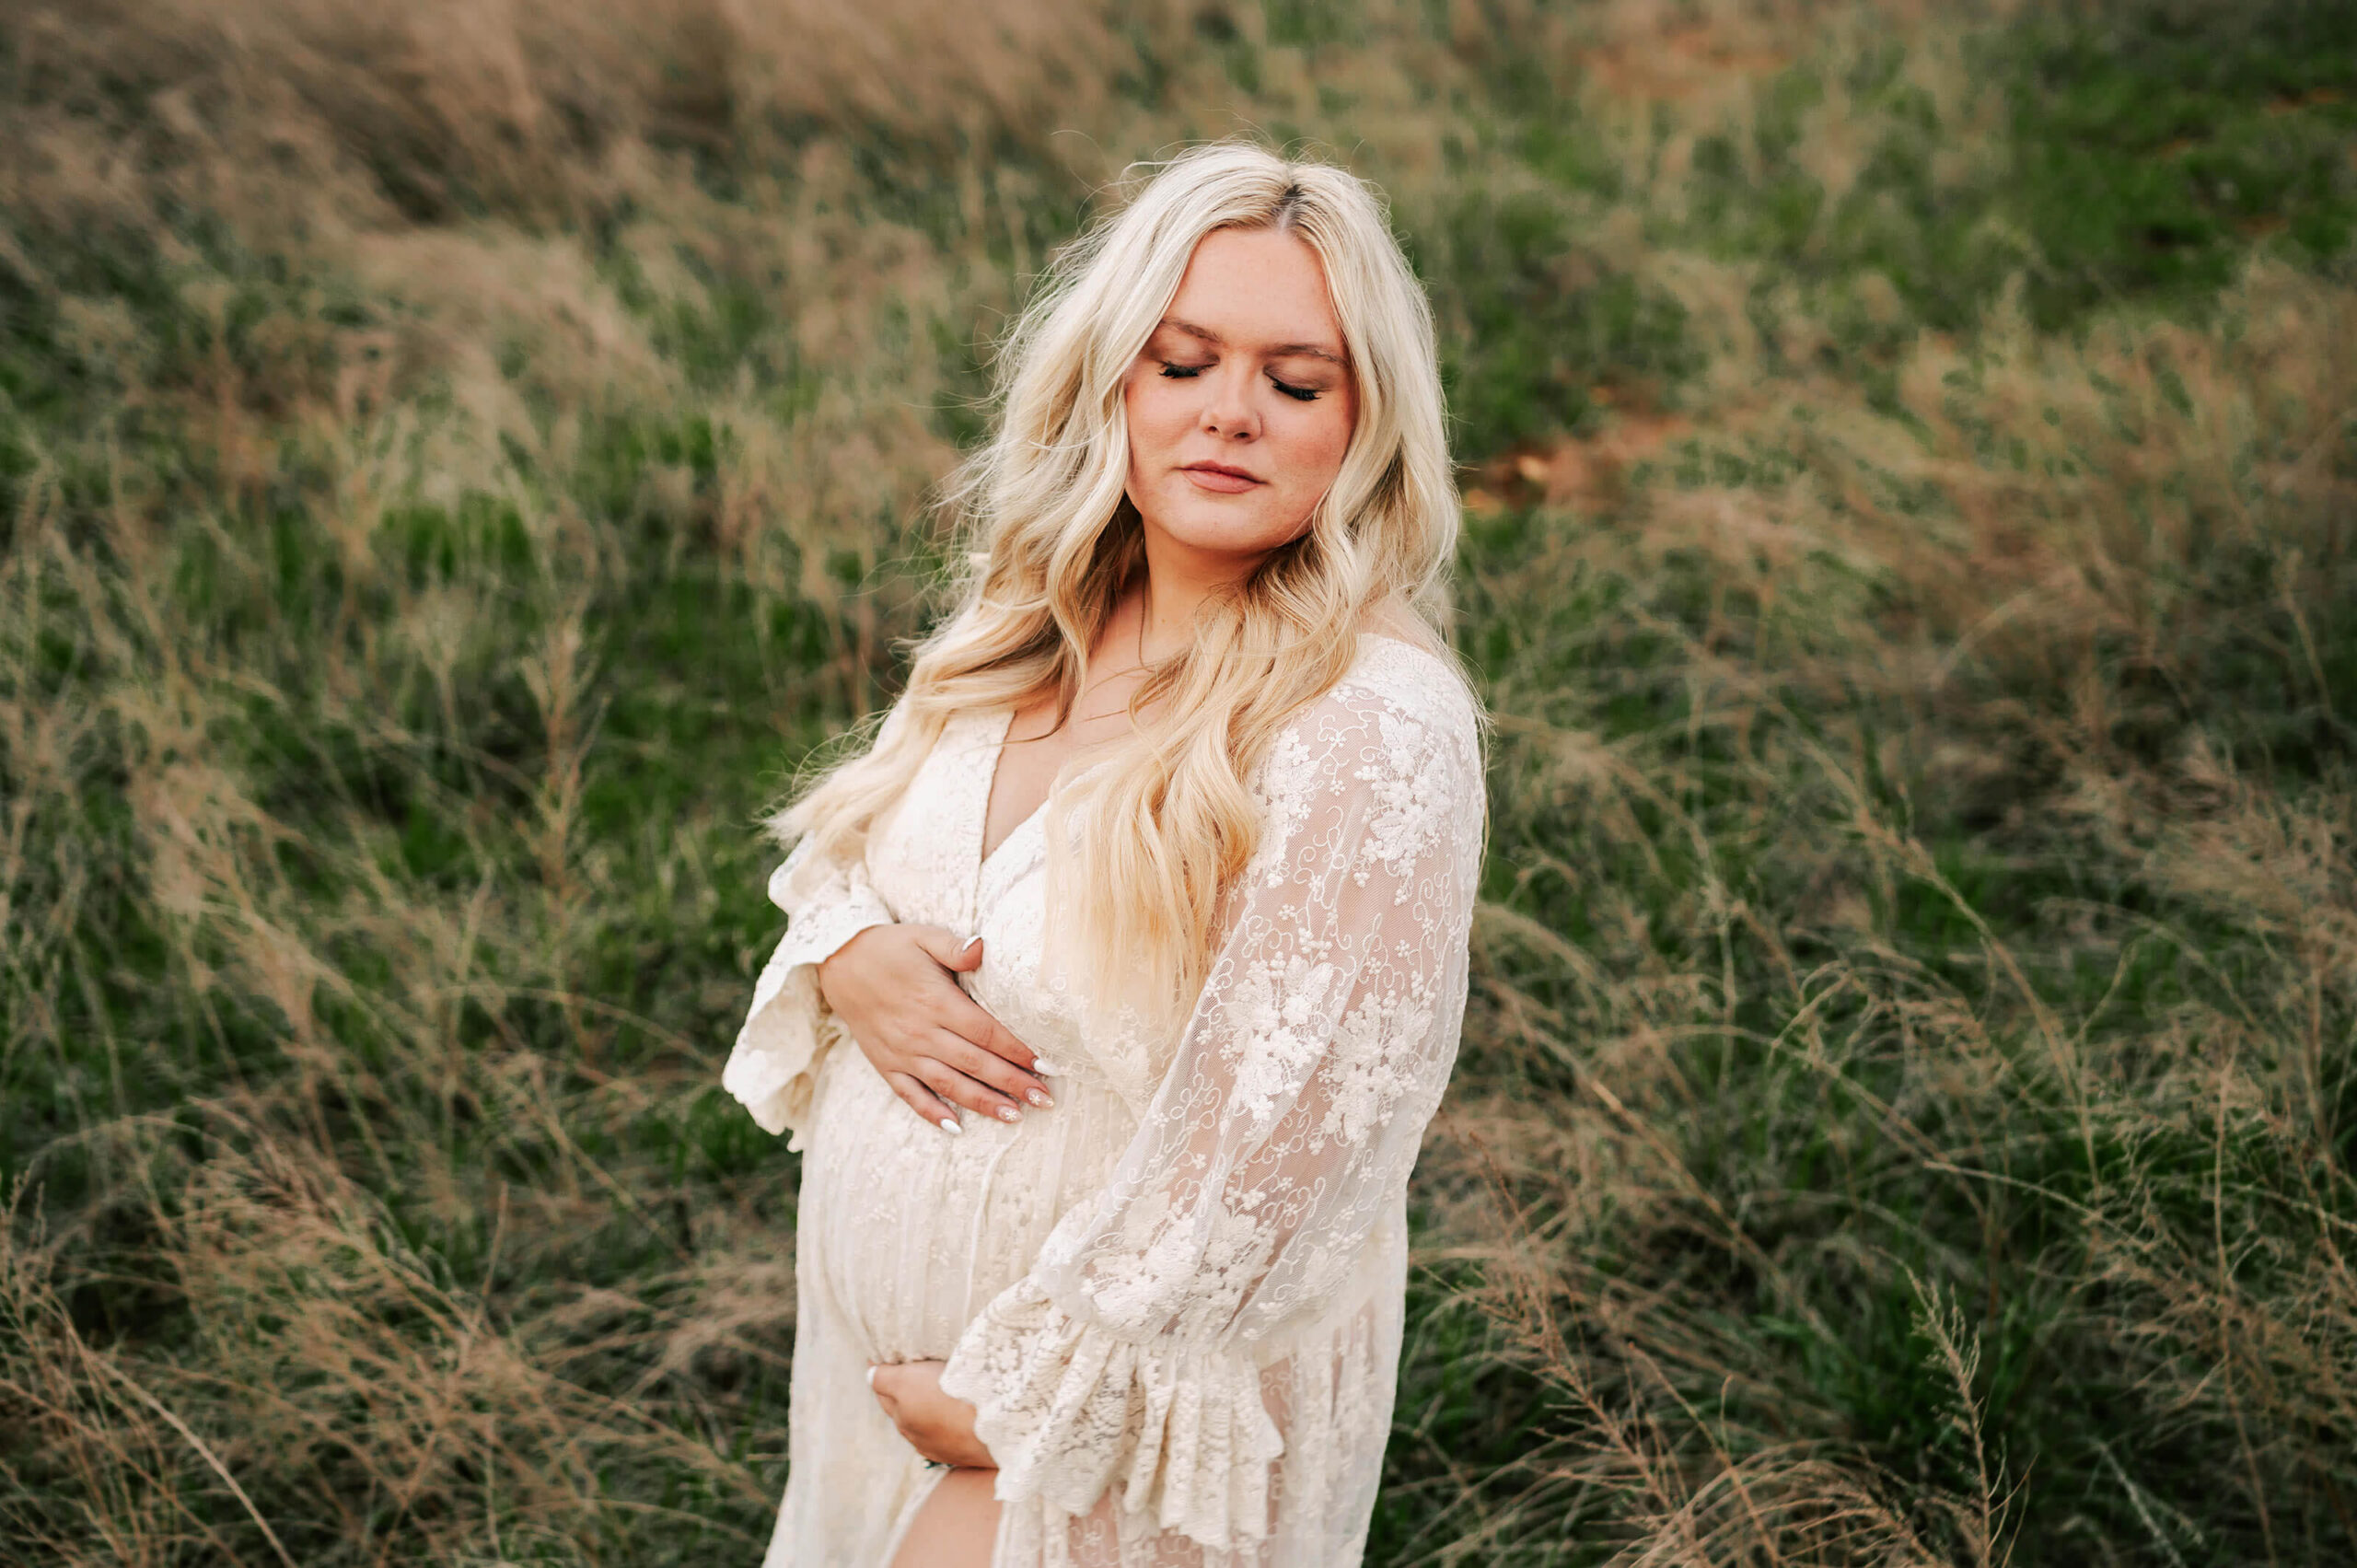 Kansas city maternity photographer captures pregnant mom in field as storm rolls in